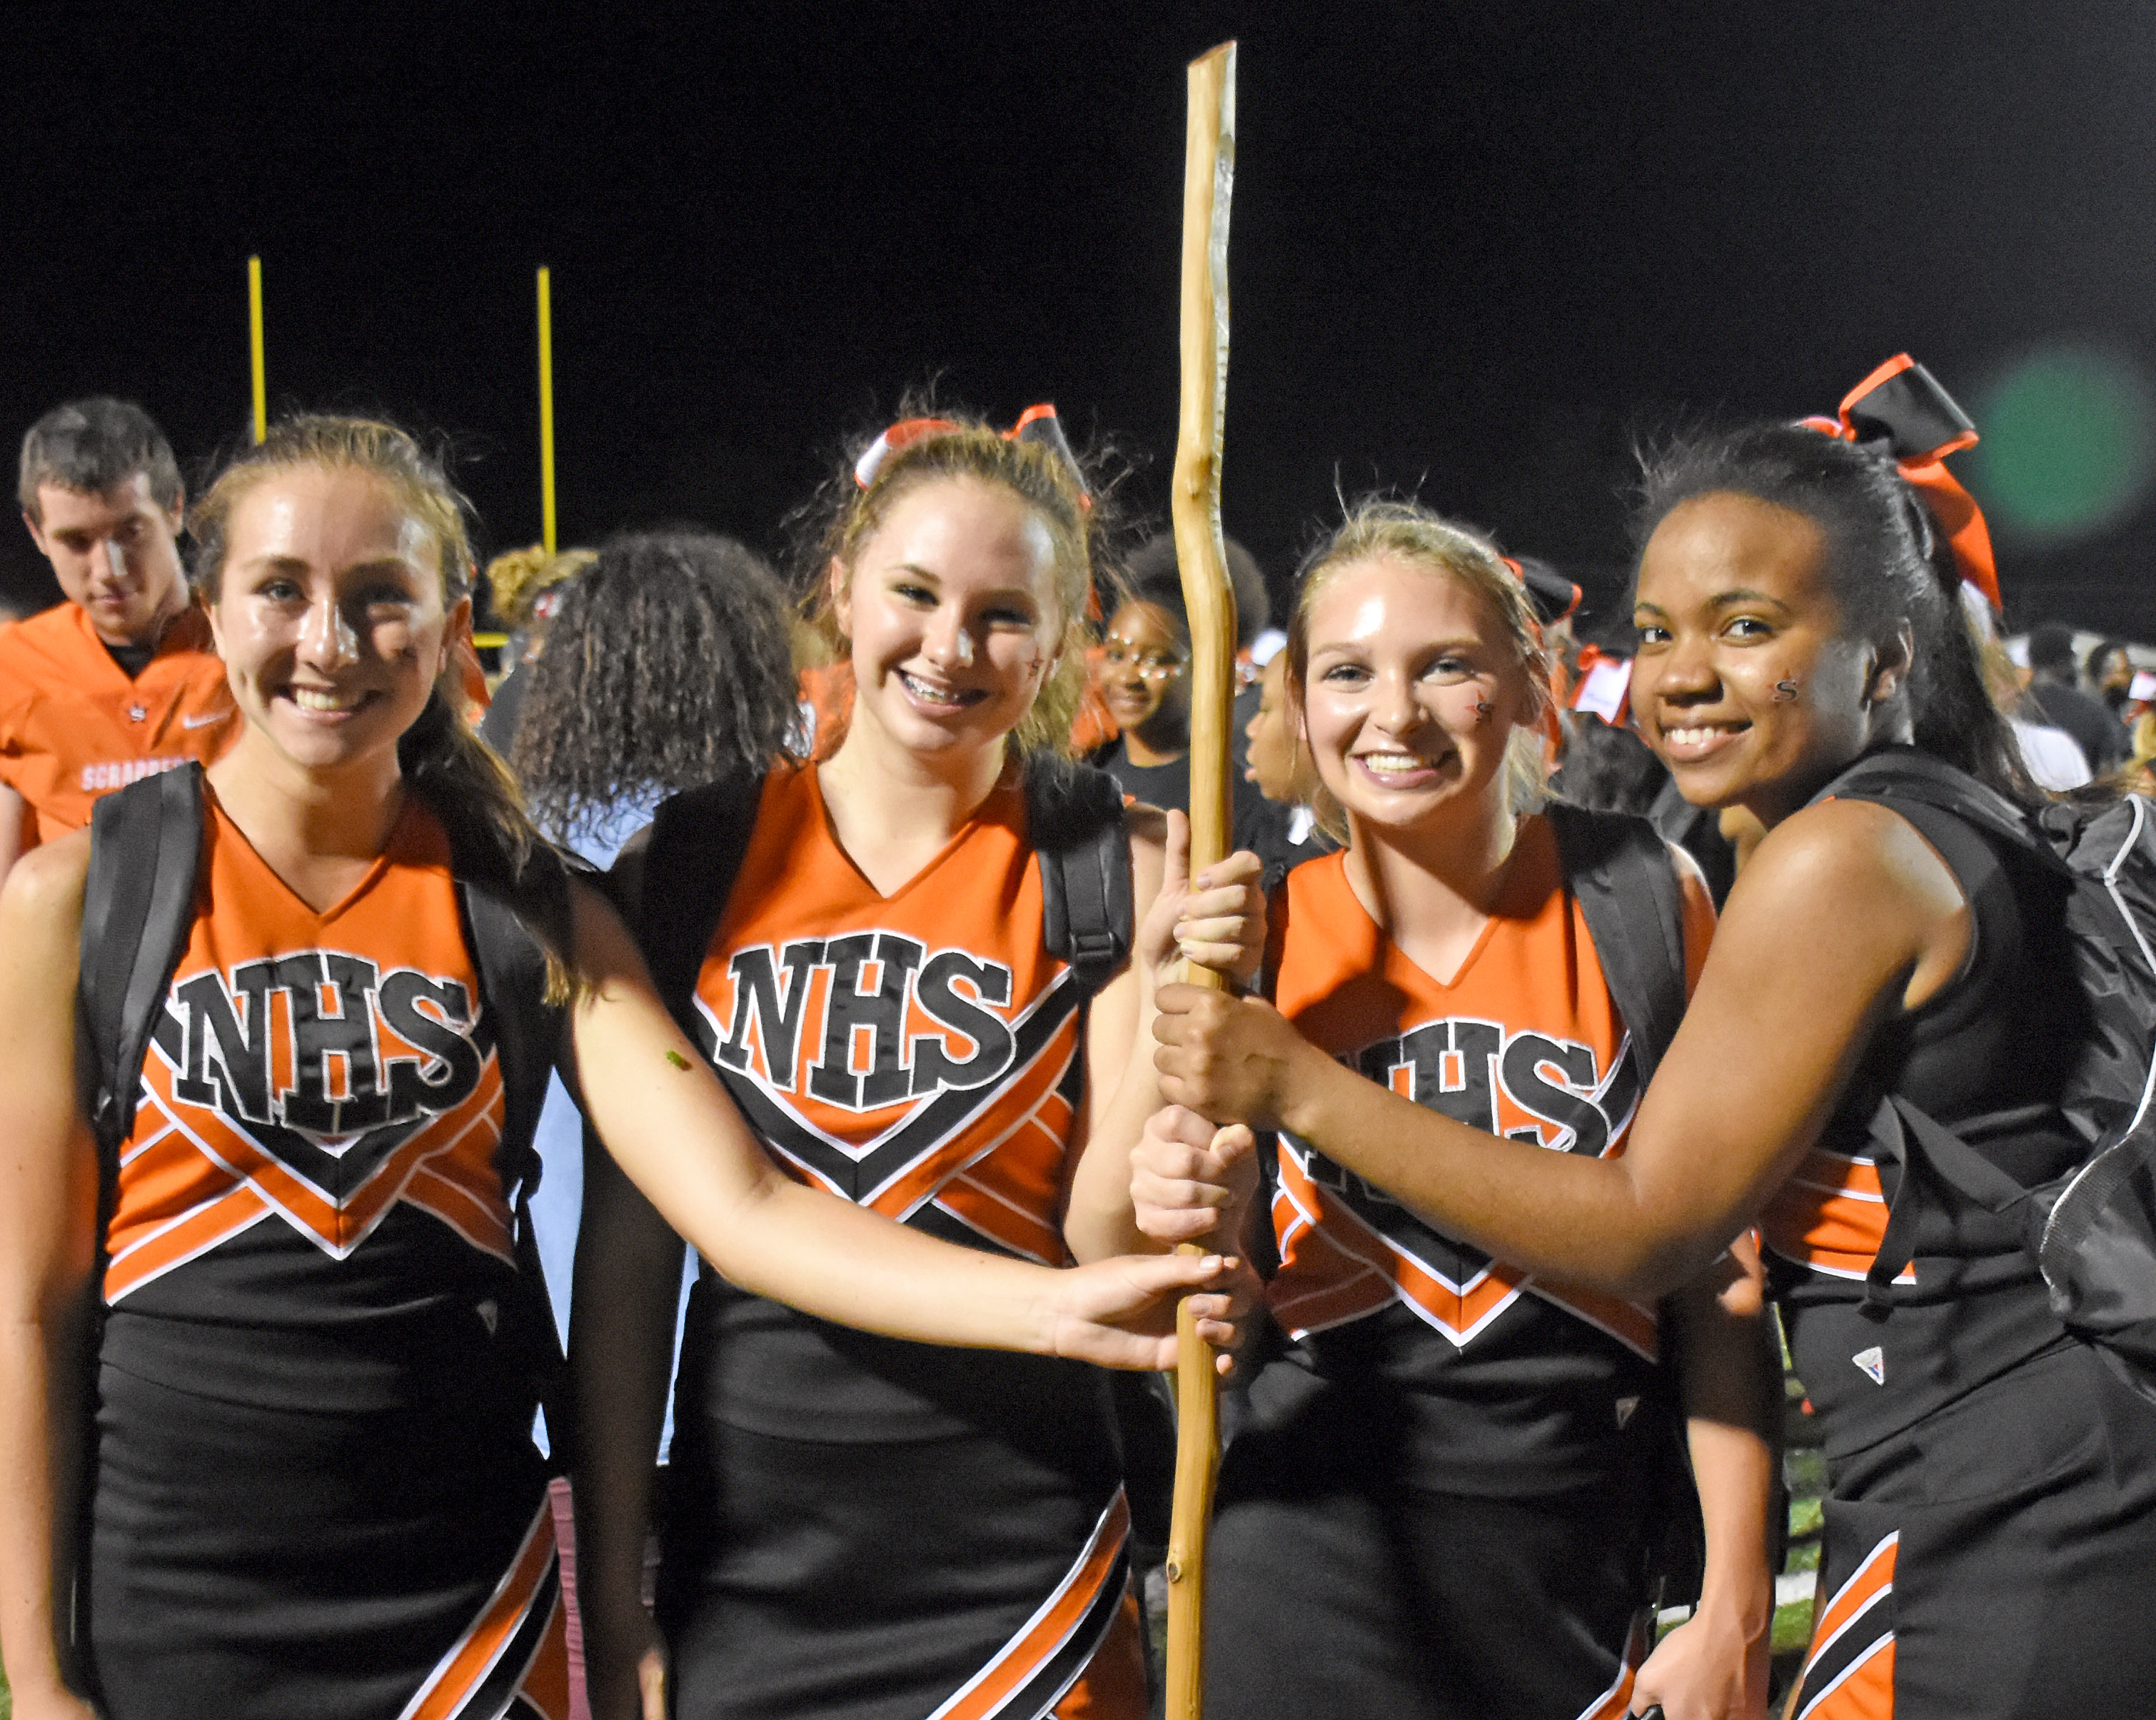 Senior cheerleaders McKenzie Morphew, Nicole Dodson, Chelsey Hile, and Asia Harris make sure the stick is taken care of after the game.